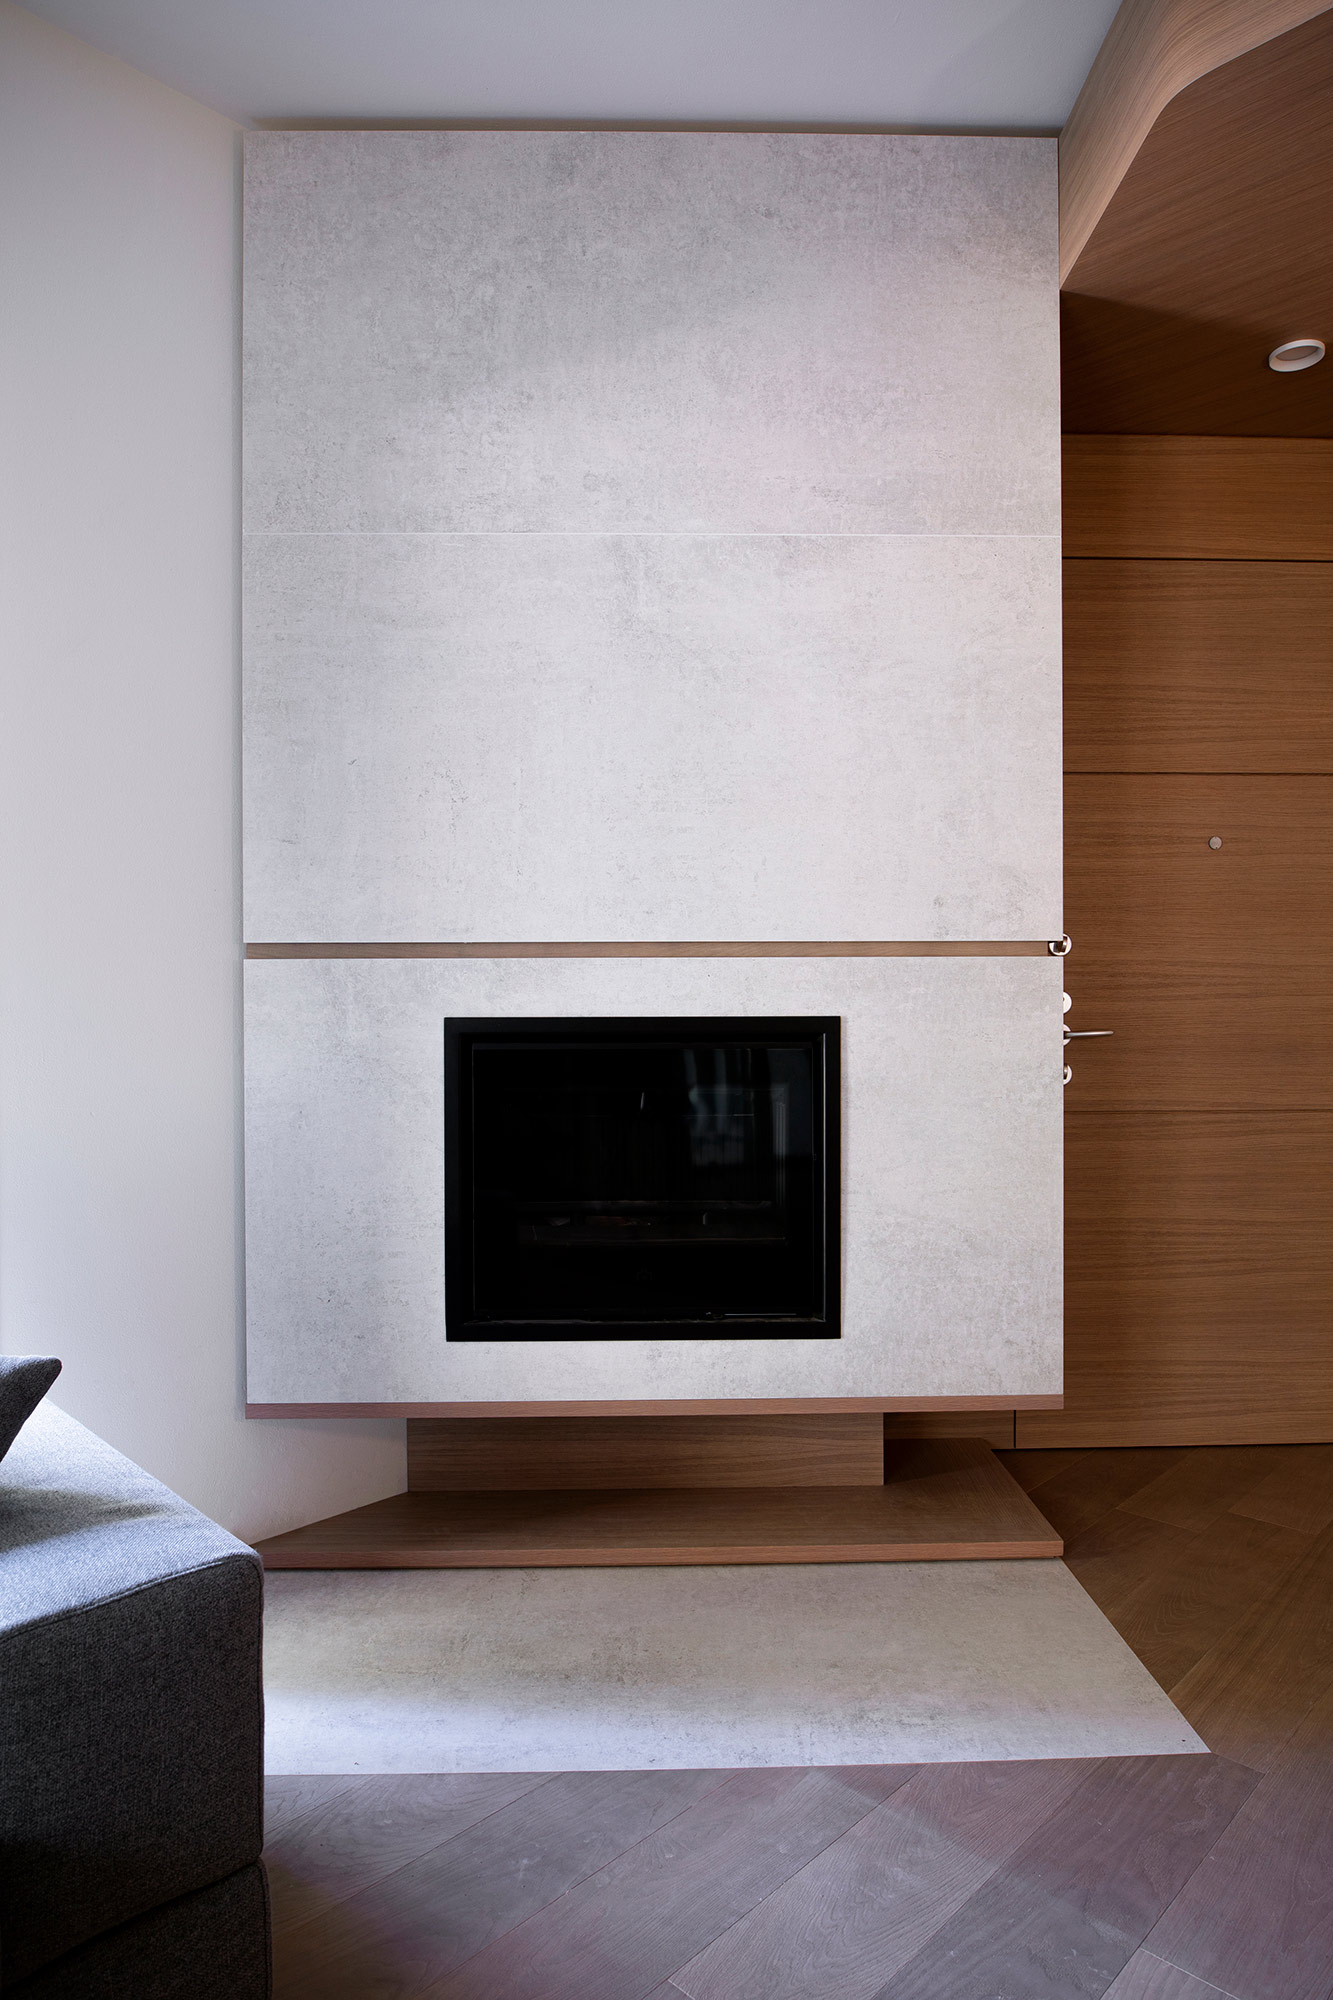 Image of villa italiana mariano cornese dekton 14 in One material, a range of uses: this modern house features Dekton Lunar in the fireplace, kitchen and bathroom - Cosentino